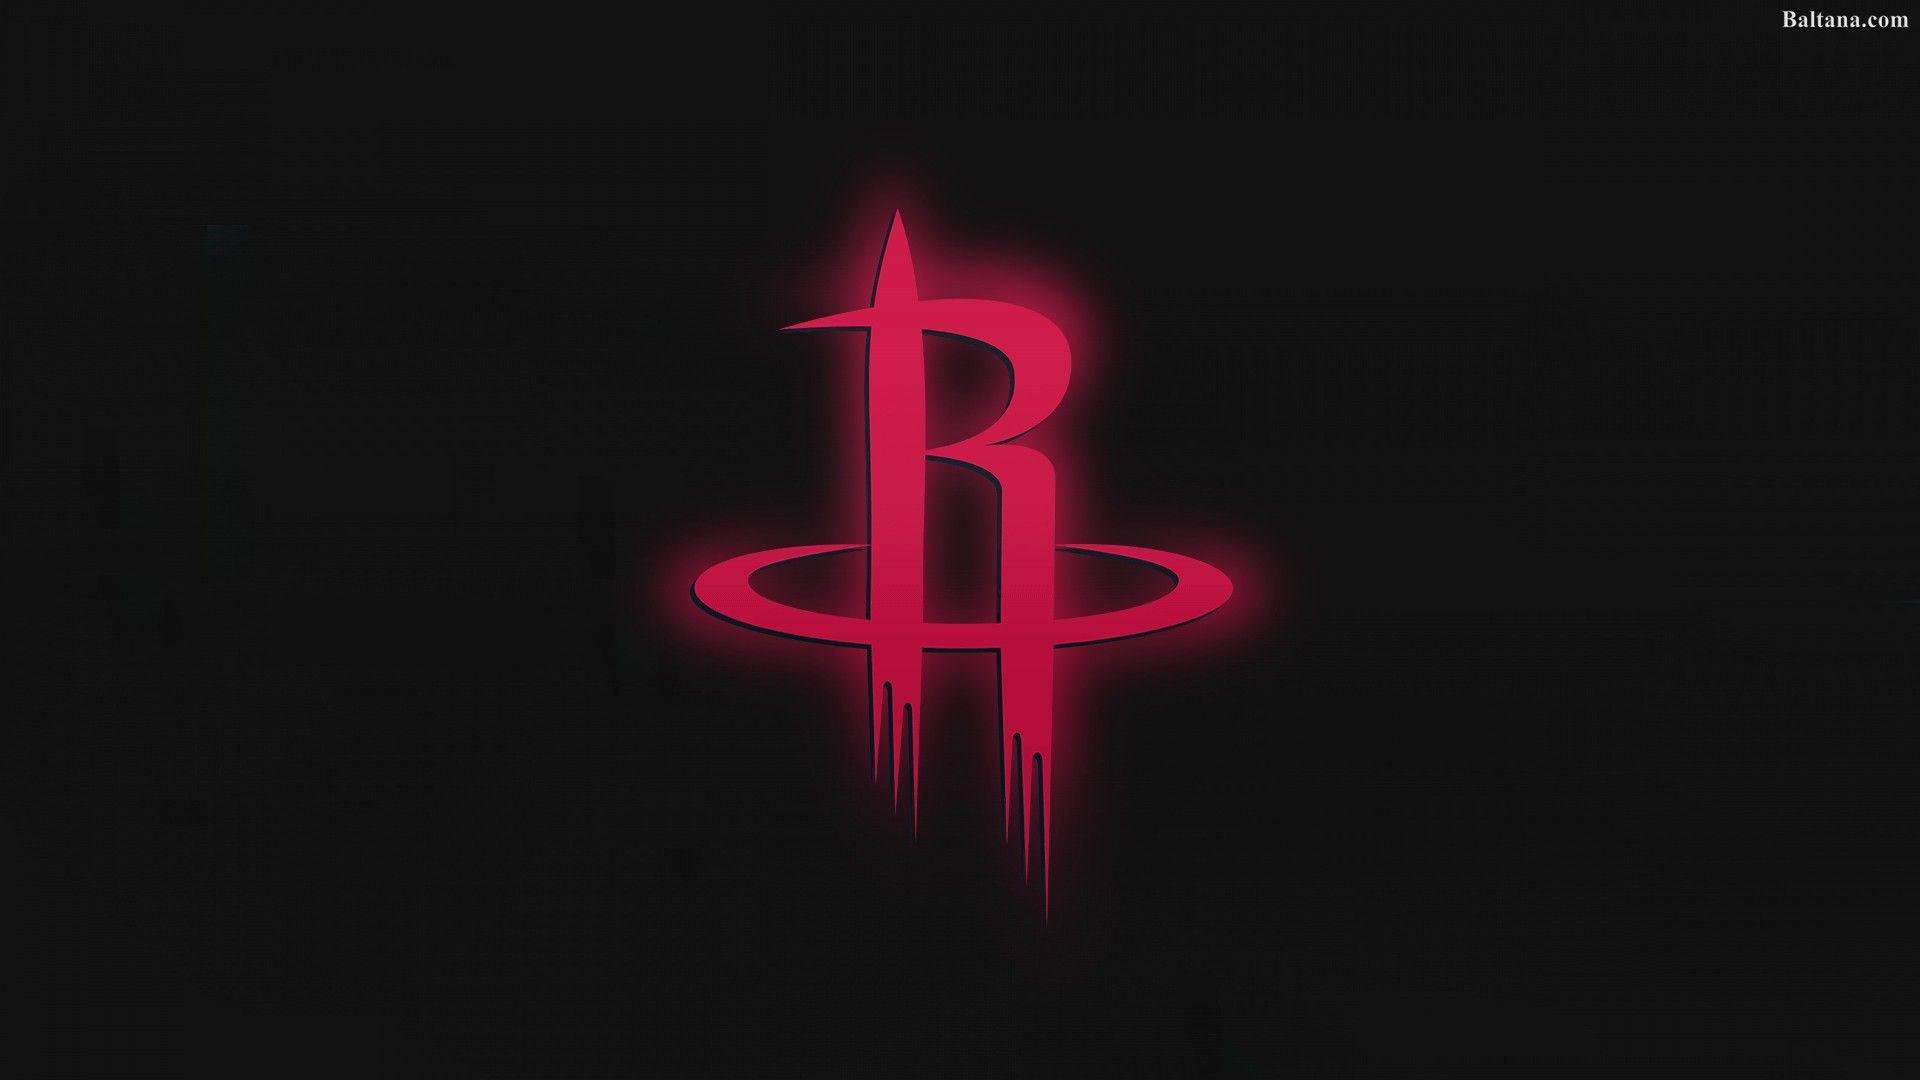 Houston Rockets Wallpapers - Top Free